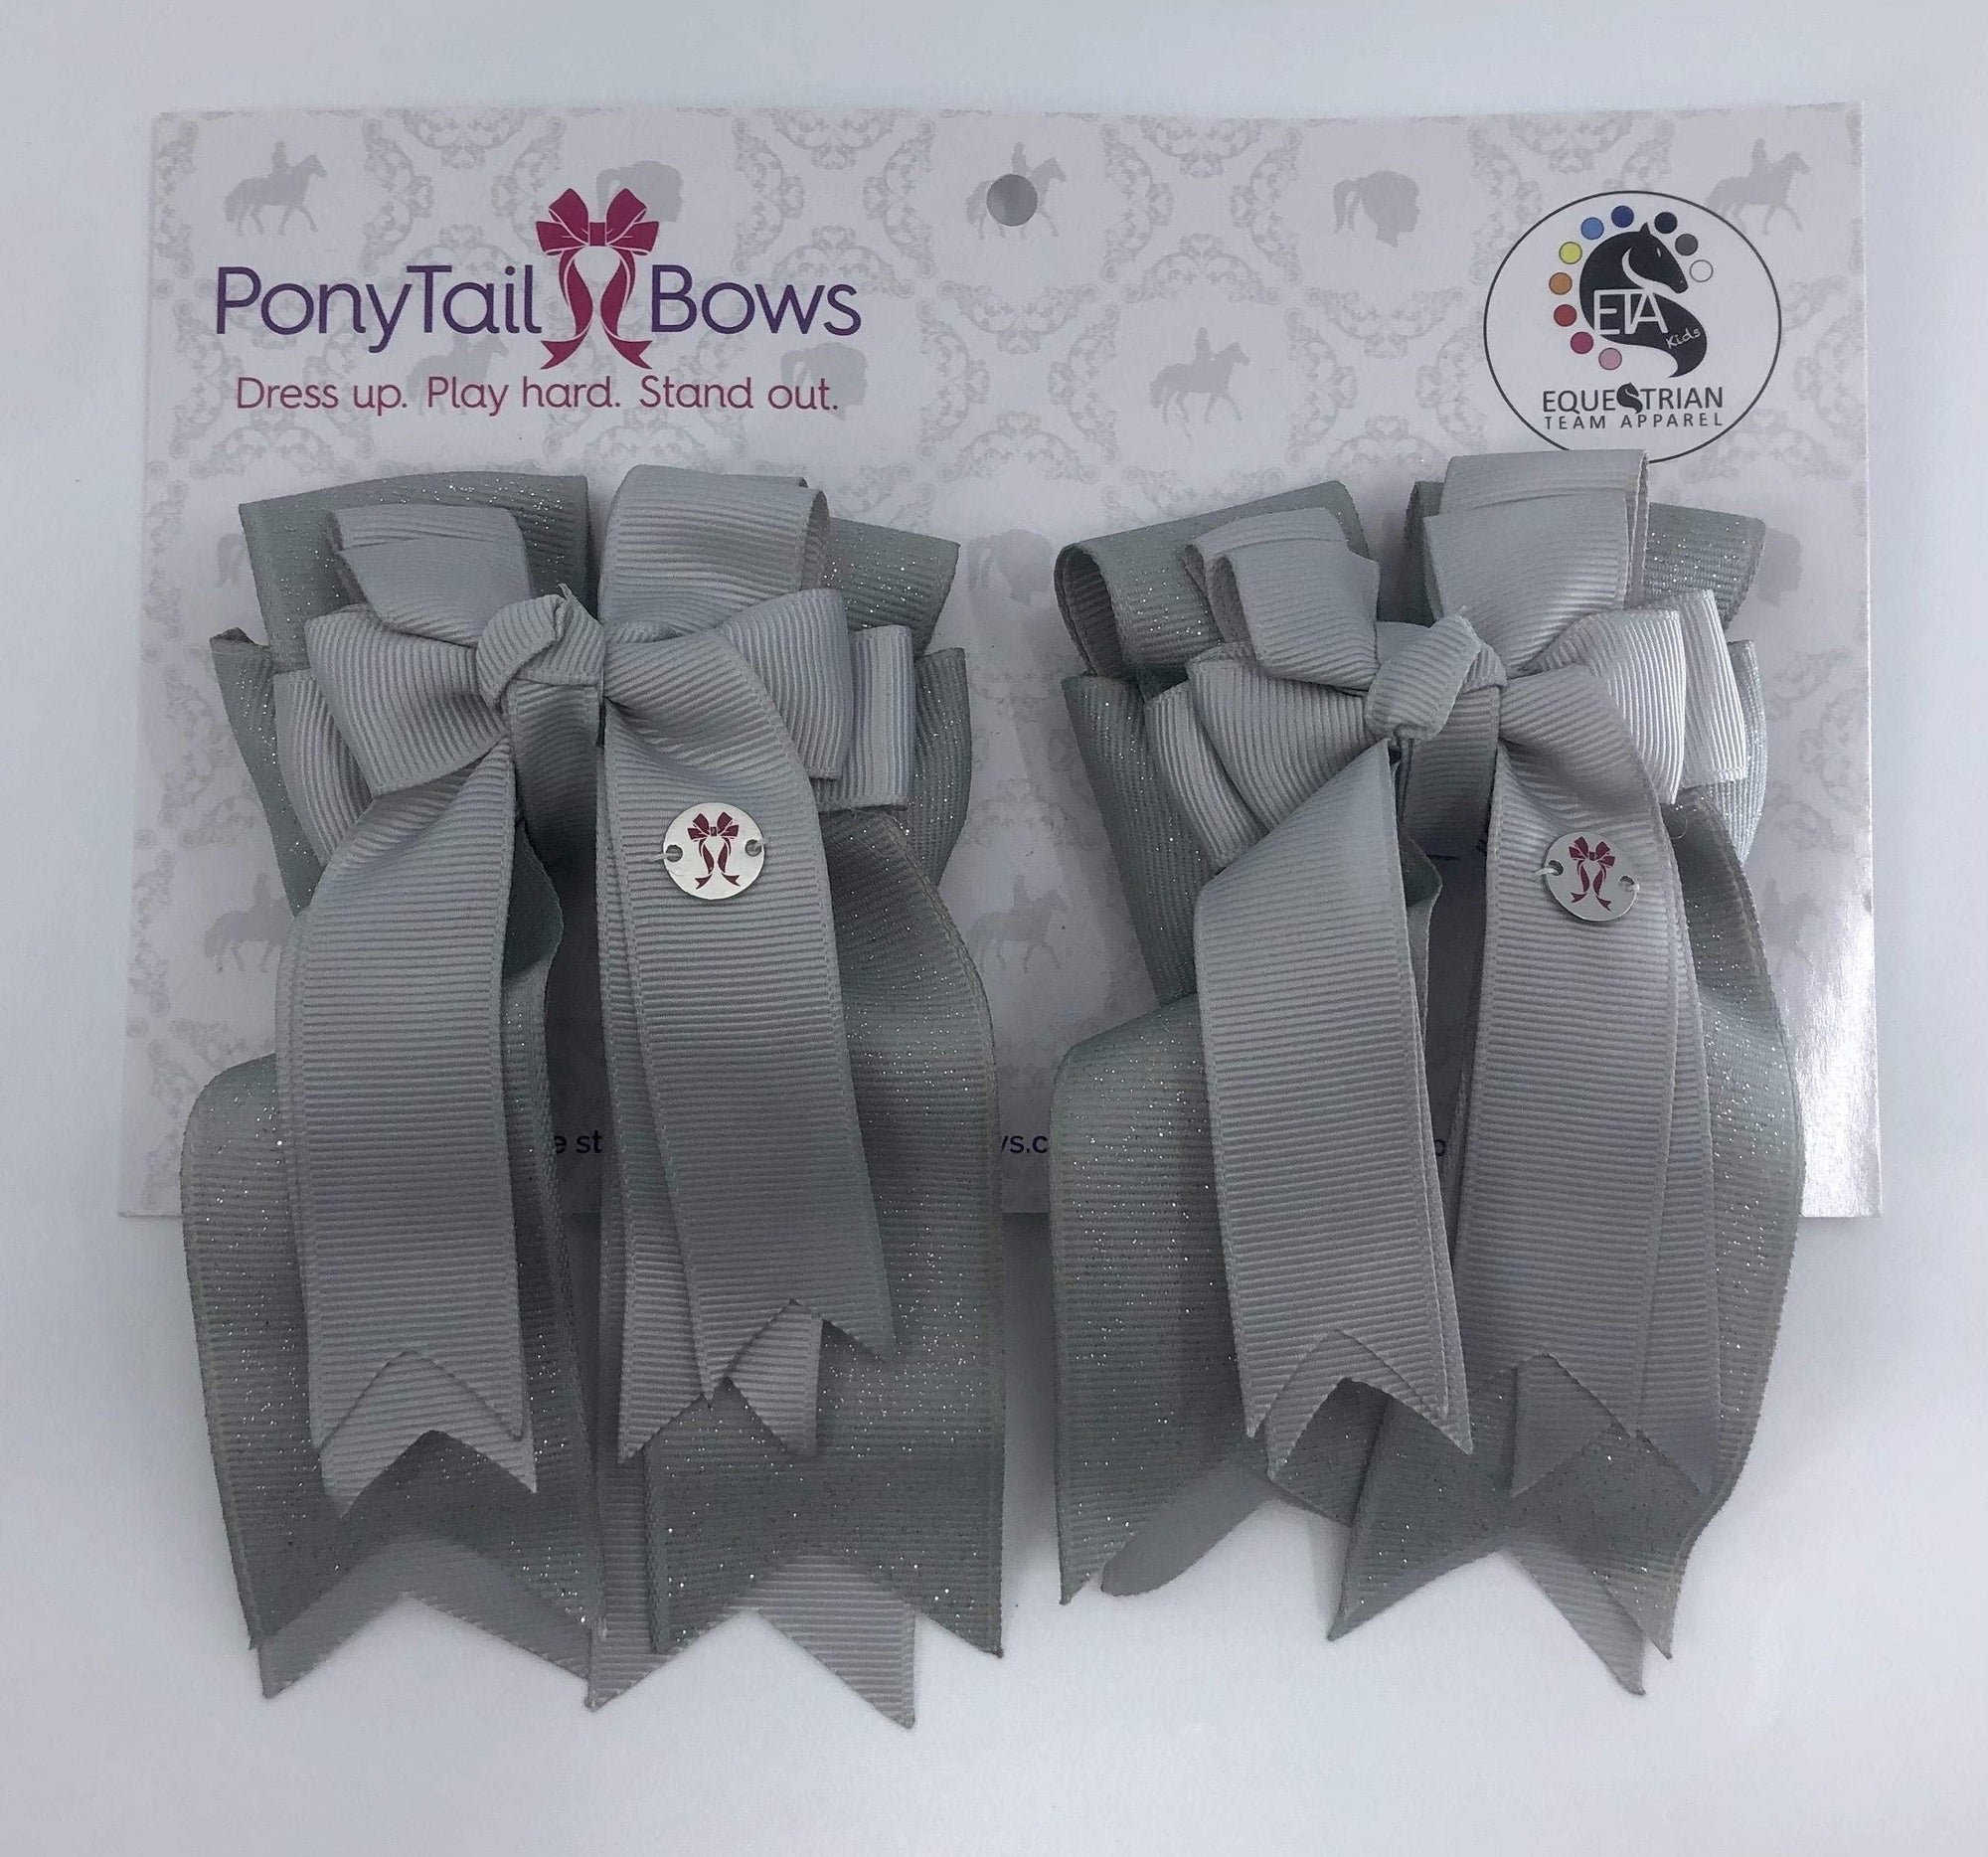 PonyTail Bows 3" Tails Grey PonyTail Bows equestrian team apparel online tack store mobile tack store custom farm apparel custom show stable clothing equestrian lifestyle horse show clothing riding clothes Abbie Horse Show Bows | PonyTail Bows | Equestrian Hair Accessories horses equestrian tack store